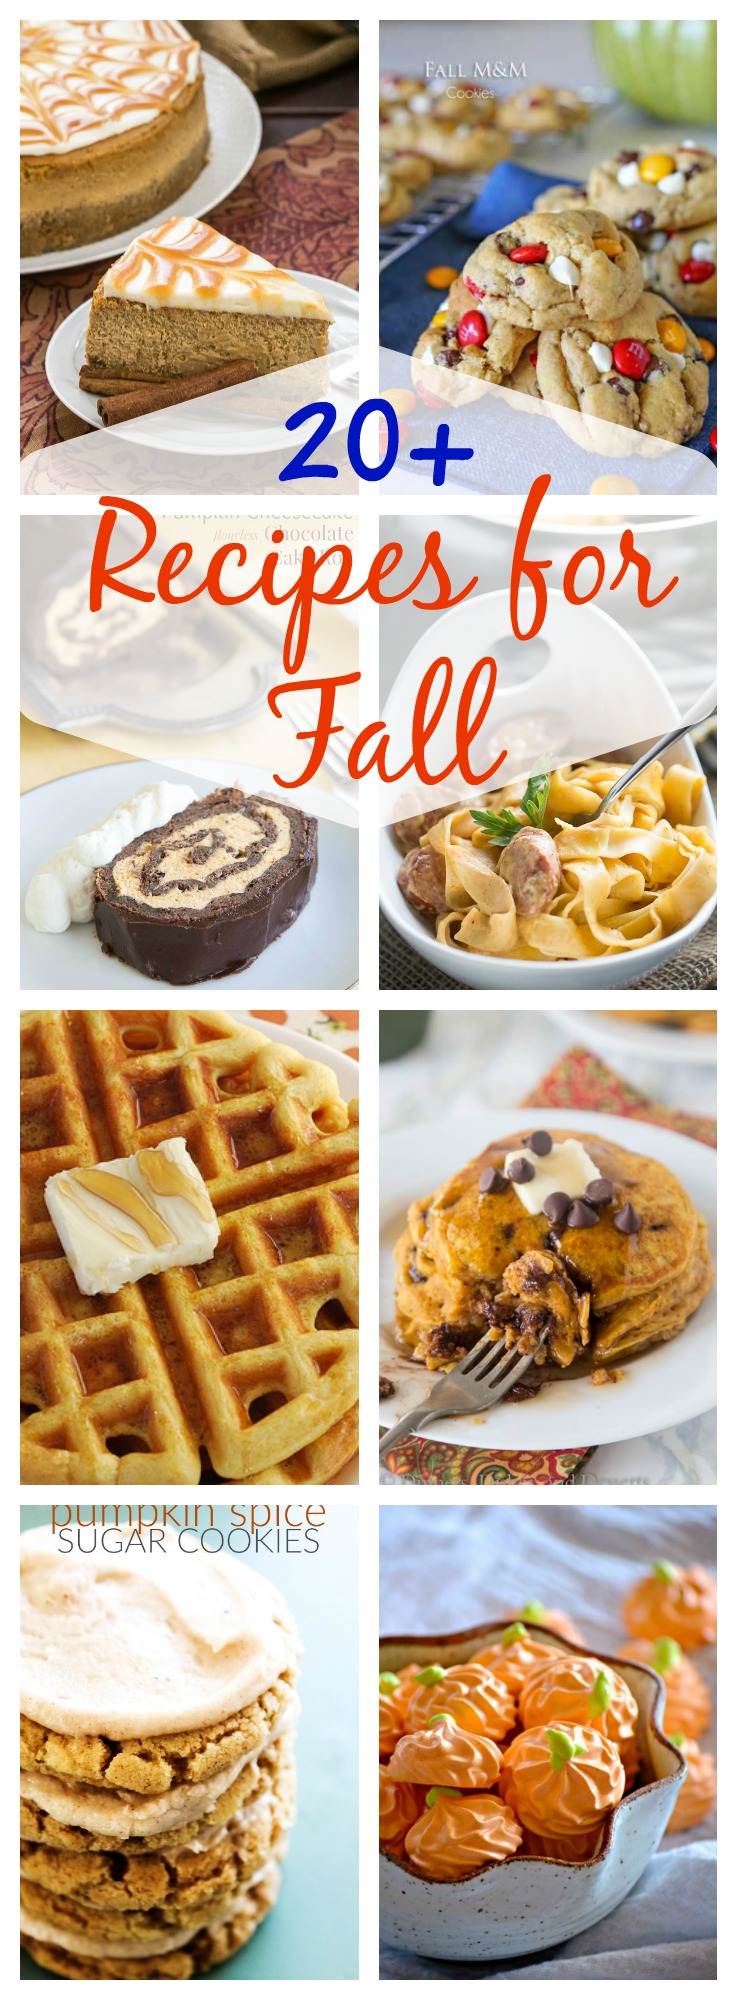 From waffles and pasta dishes to cakes and cookies, here are 20+ super amazing fall recipes for you to cozy up to! Add them to your menu plans ASAP!